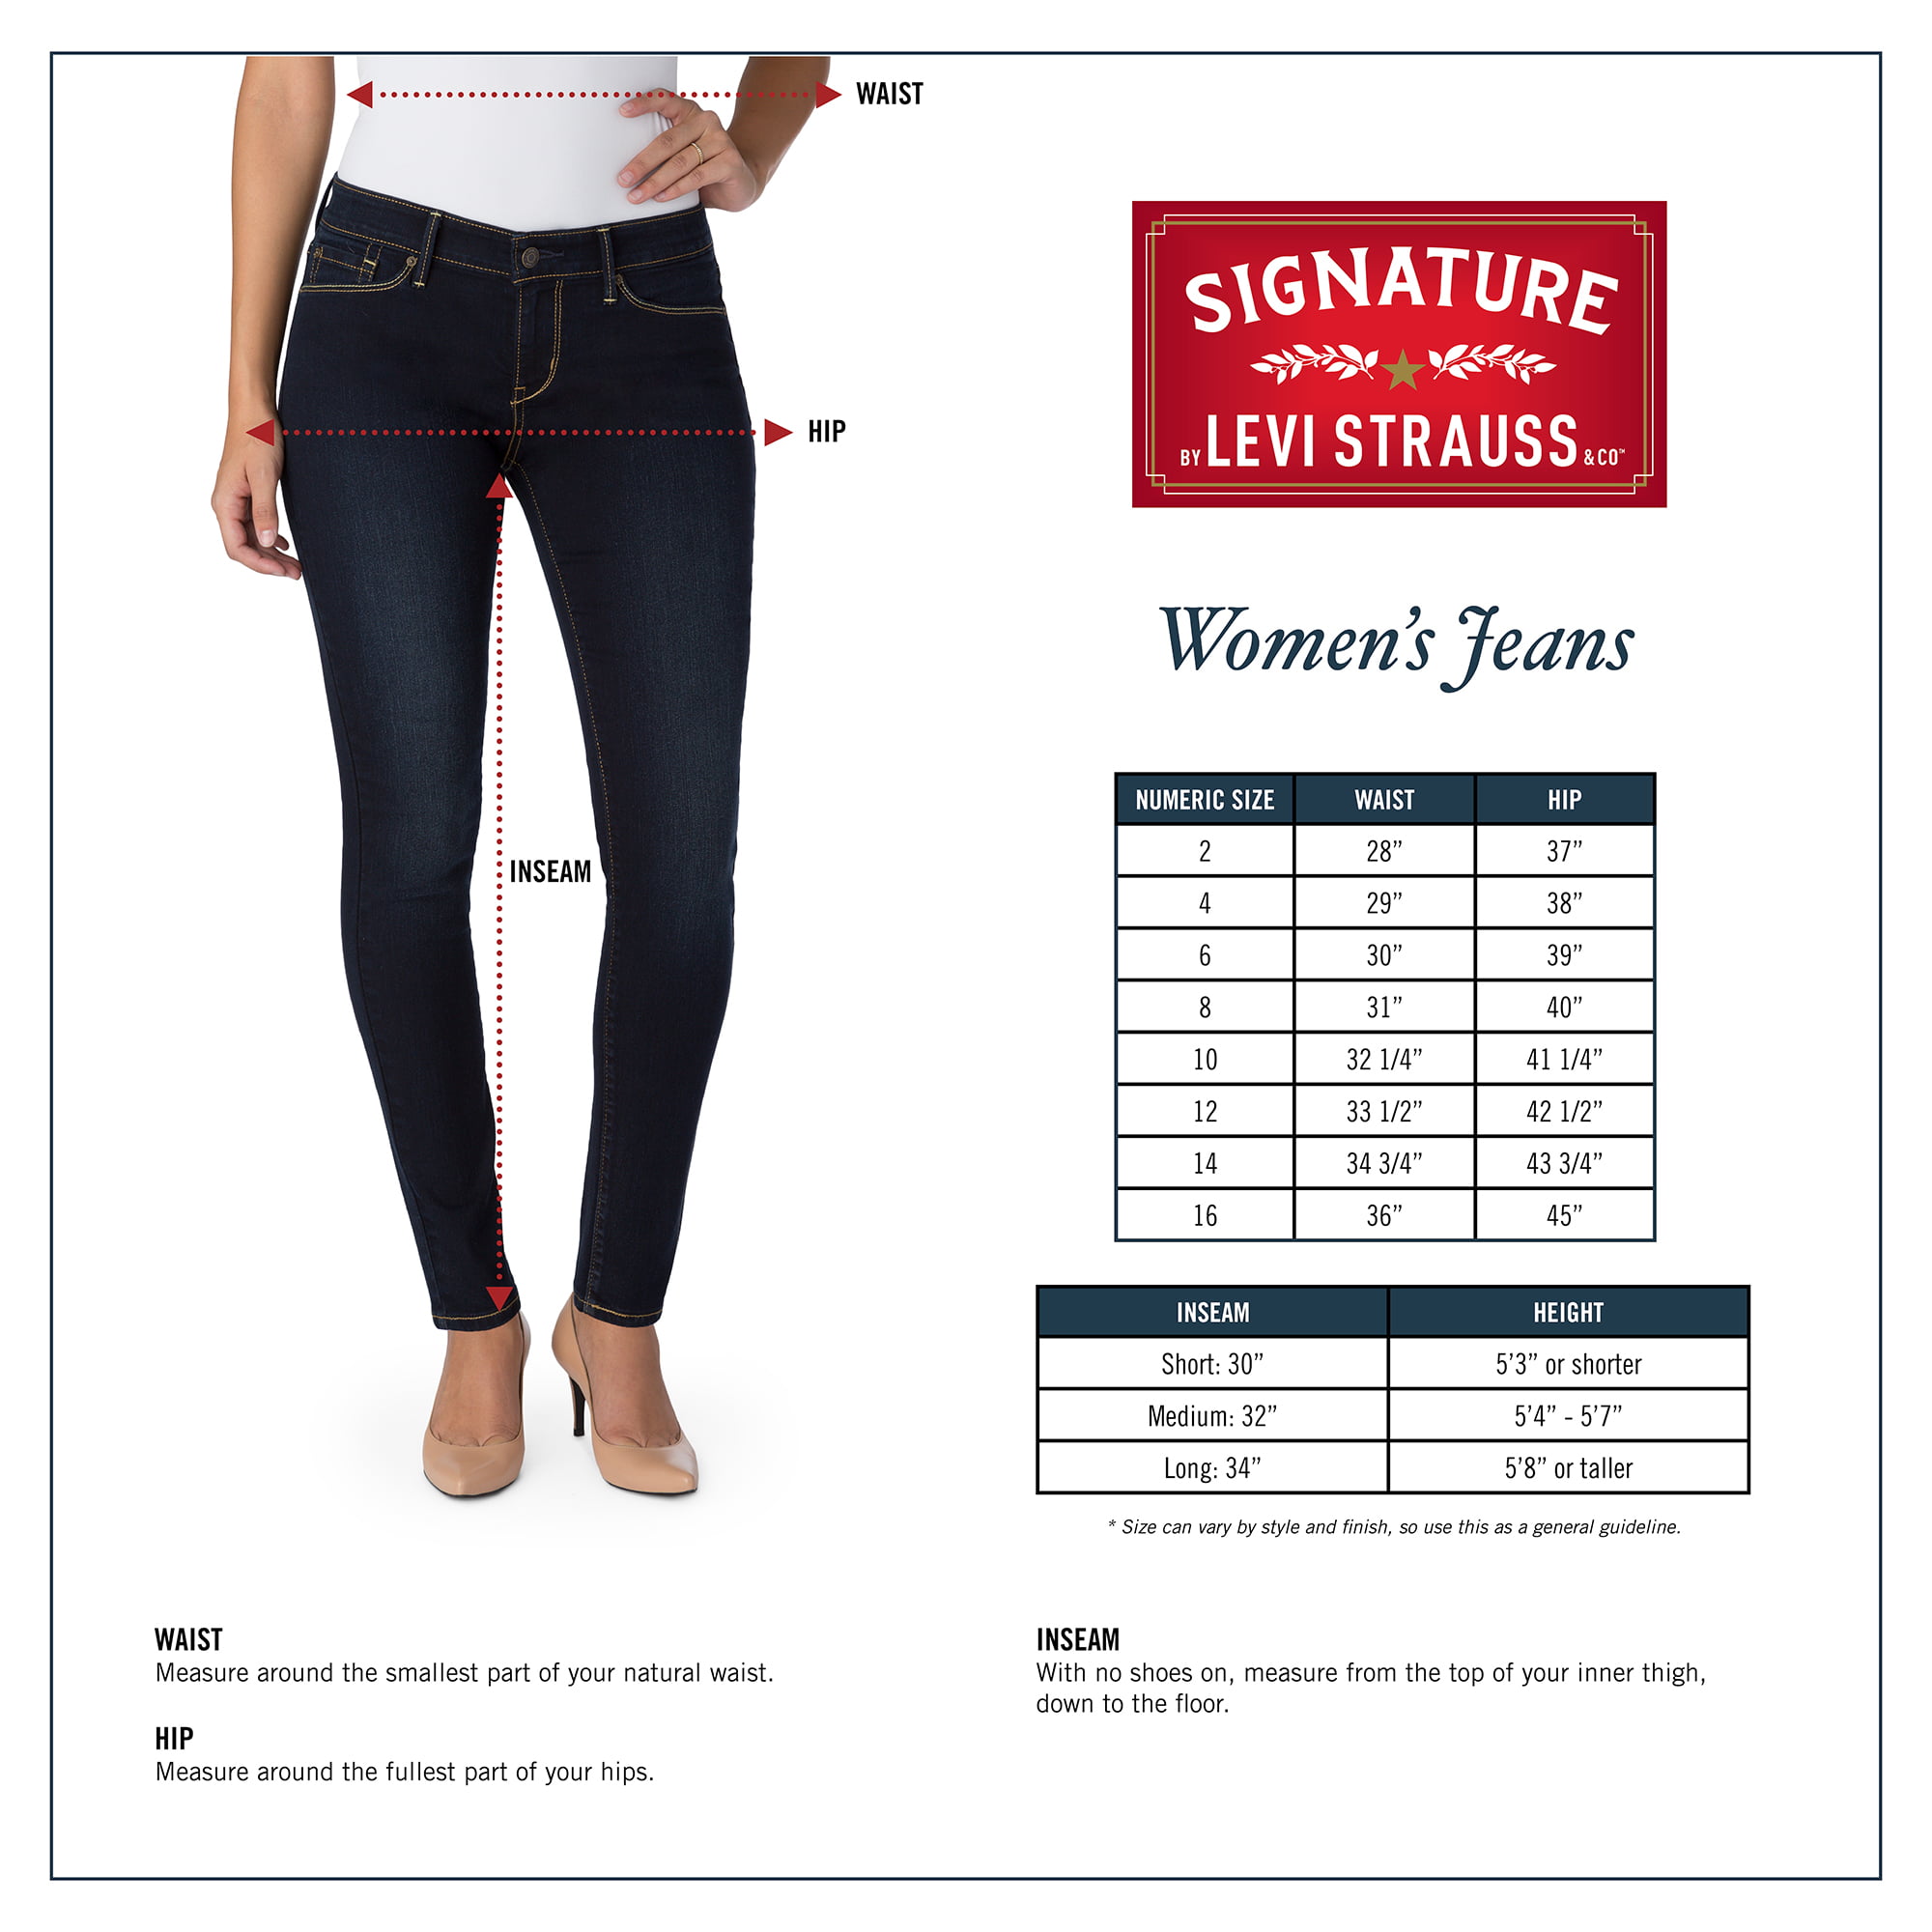 levis sizing womens jeans